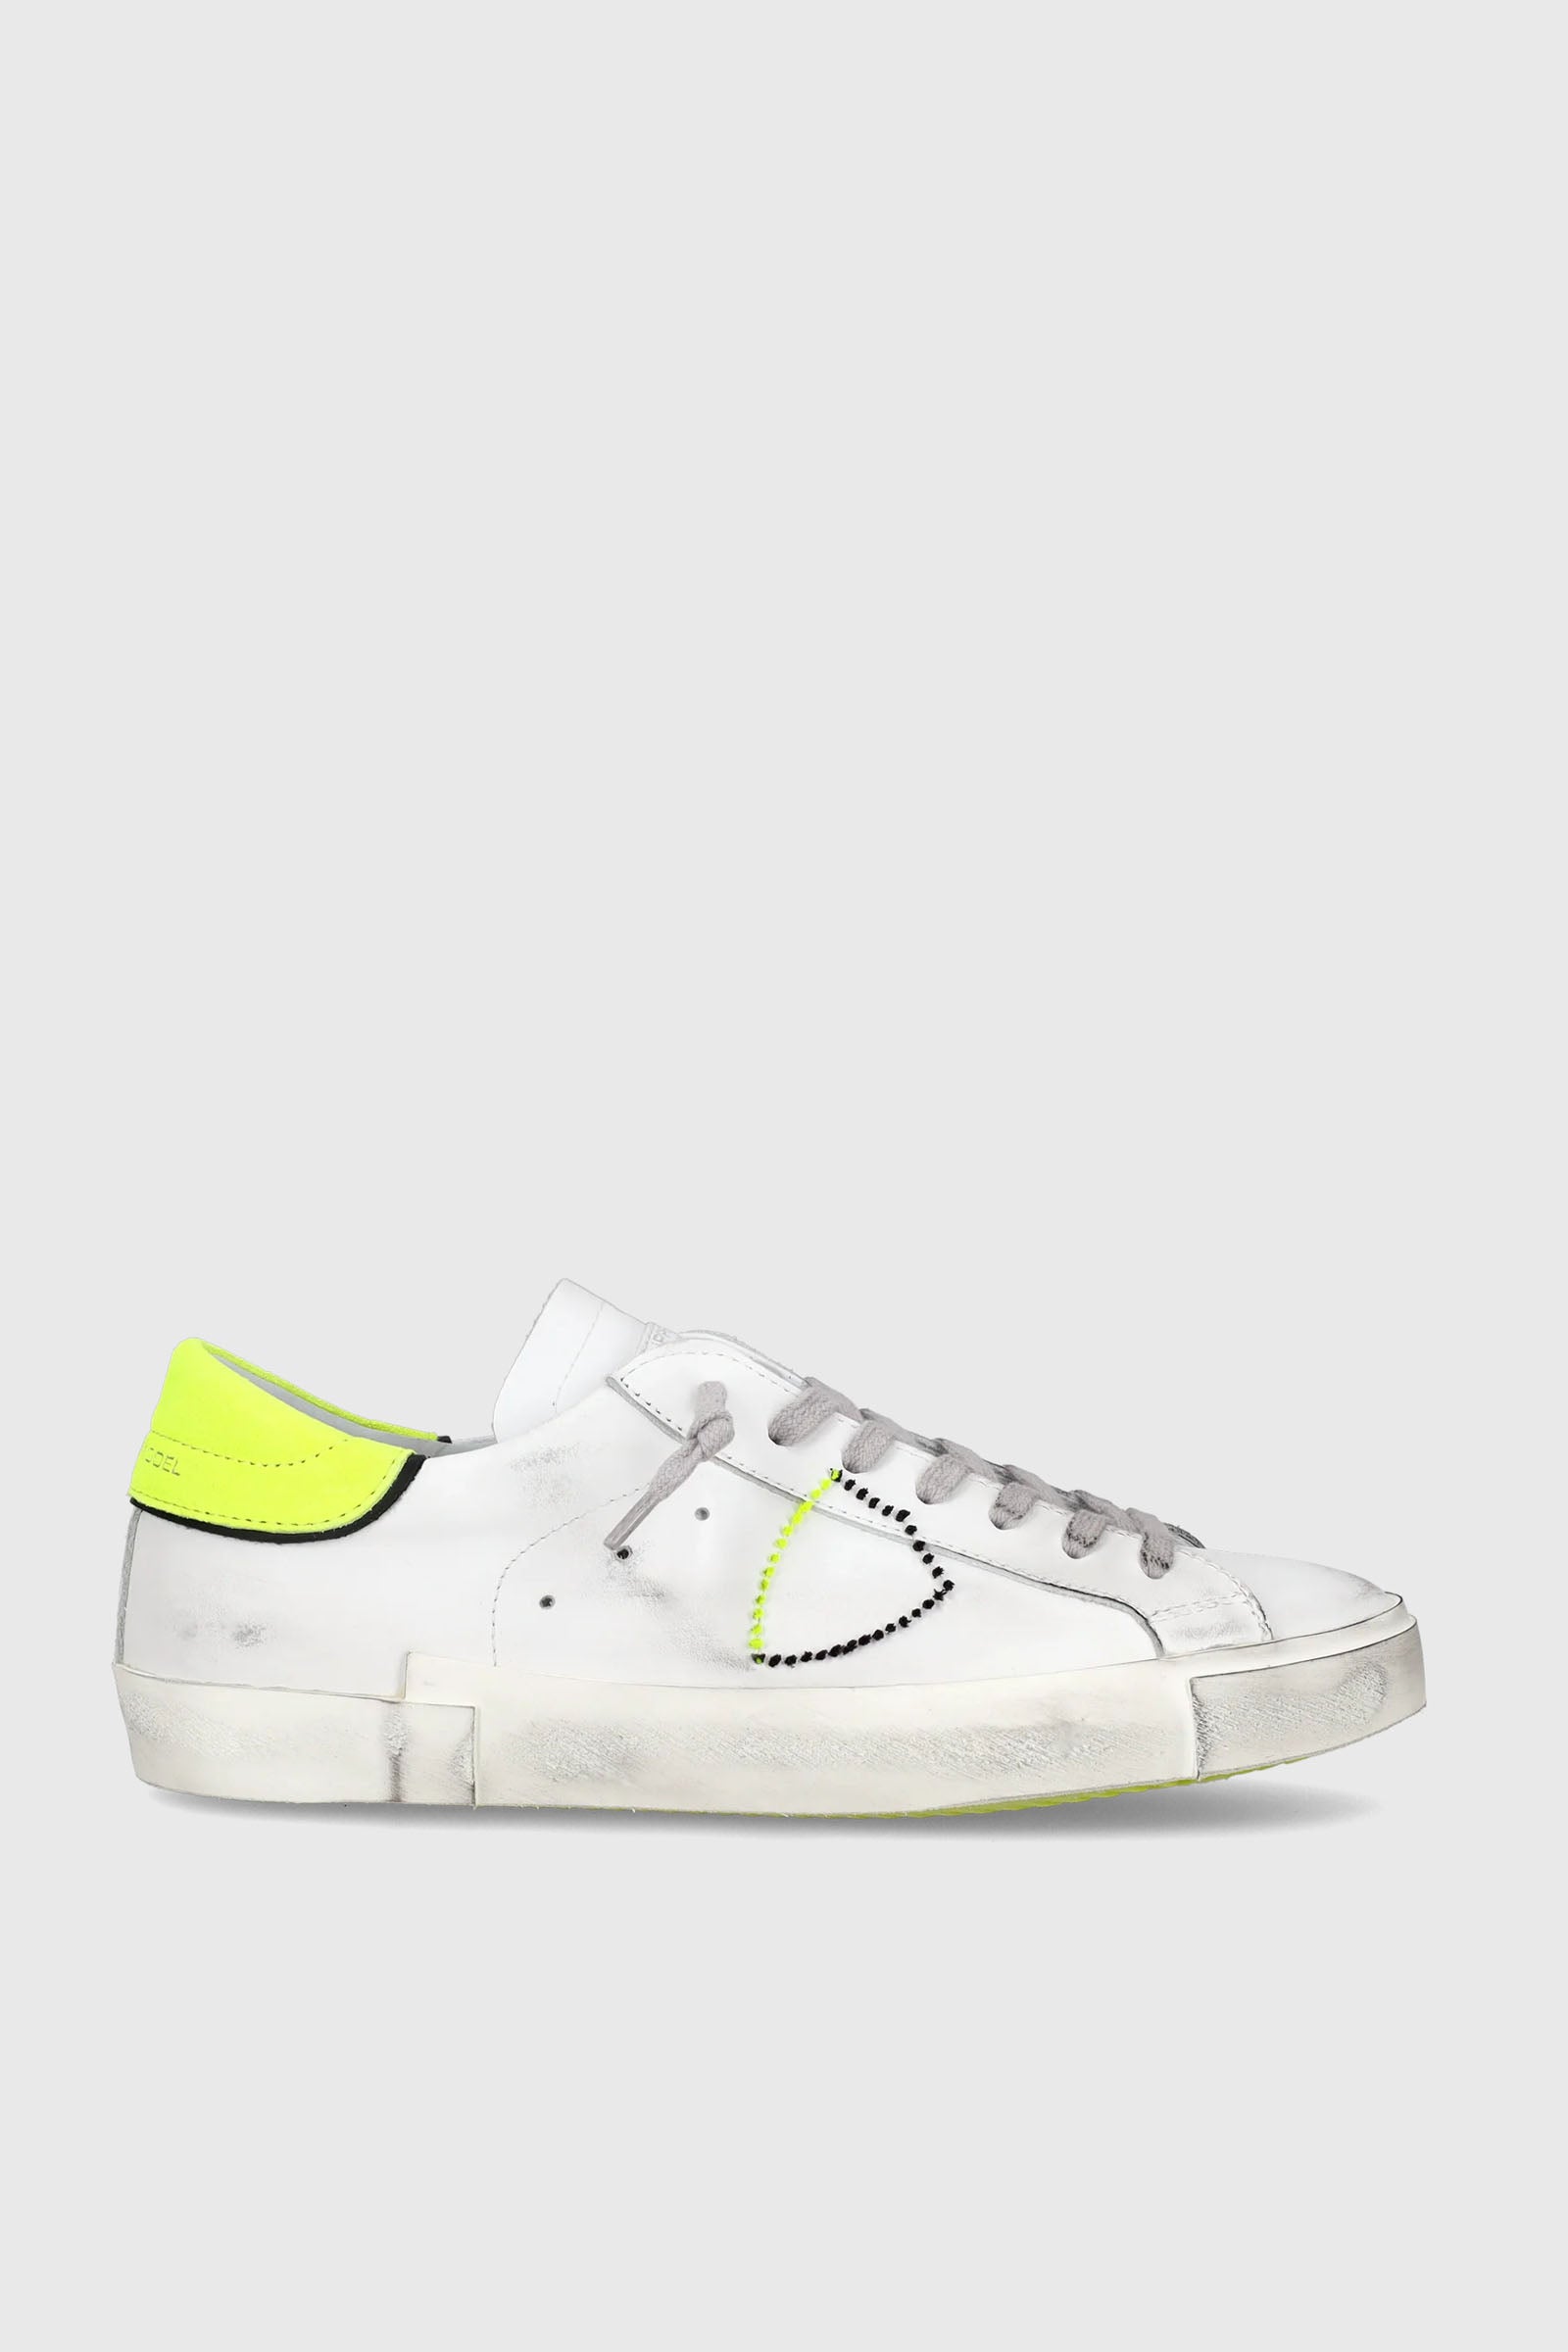 Philippe Model Sneakers PRSX Veau Broderie Pelle Bianco/Giallo Fluo - 1